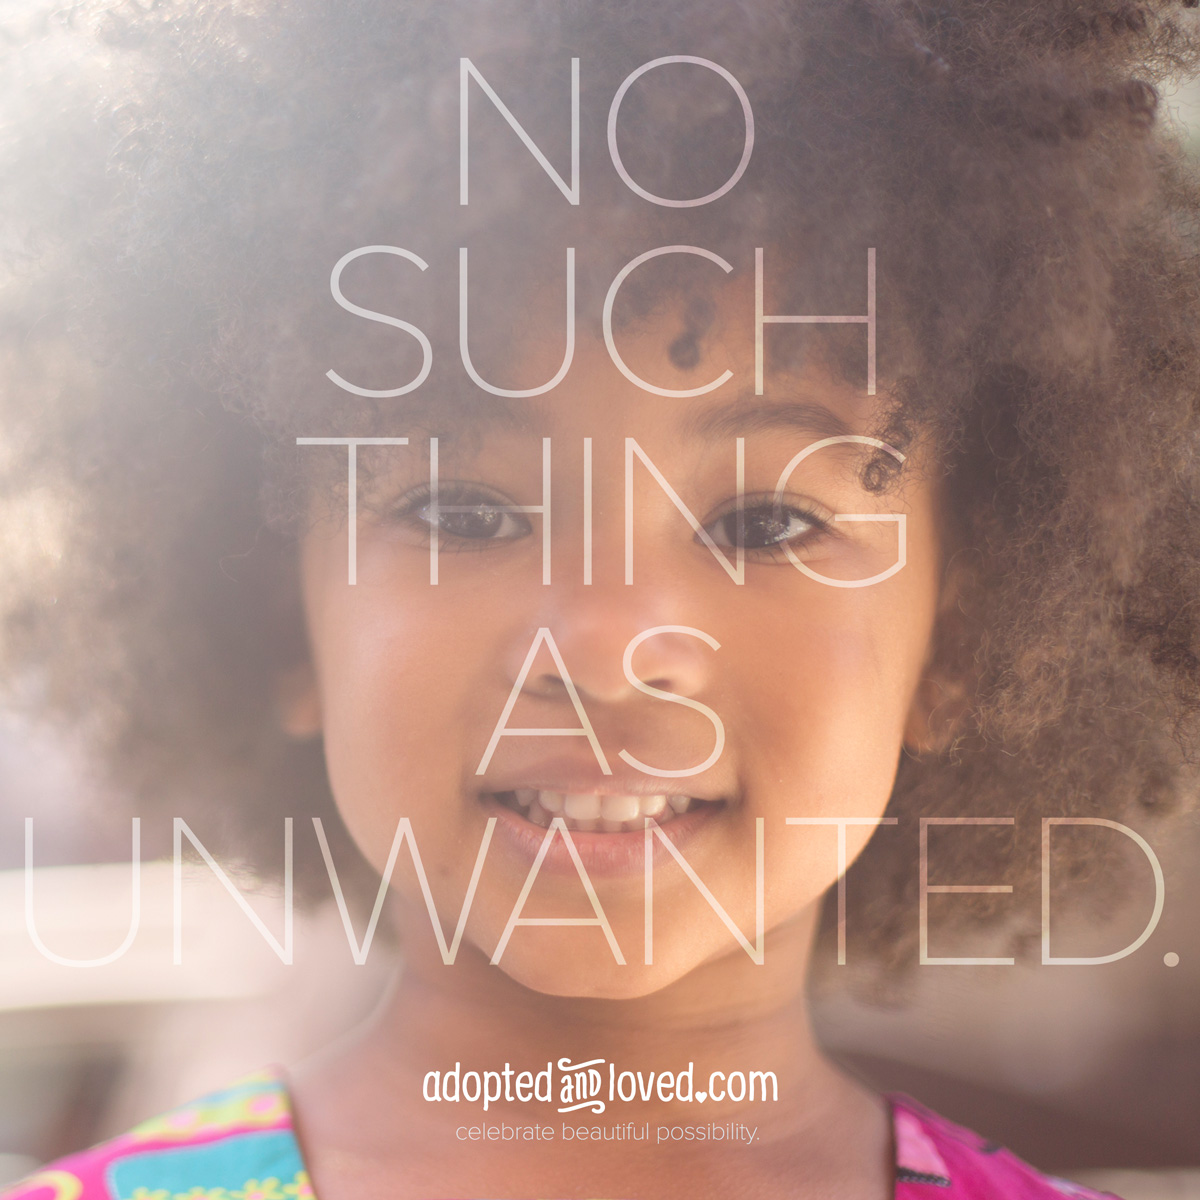 "No Such Thing As Unwanted" by The Radiance Foundation